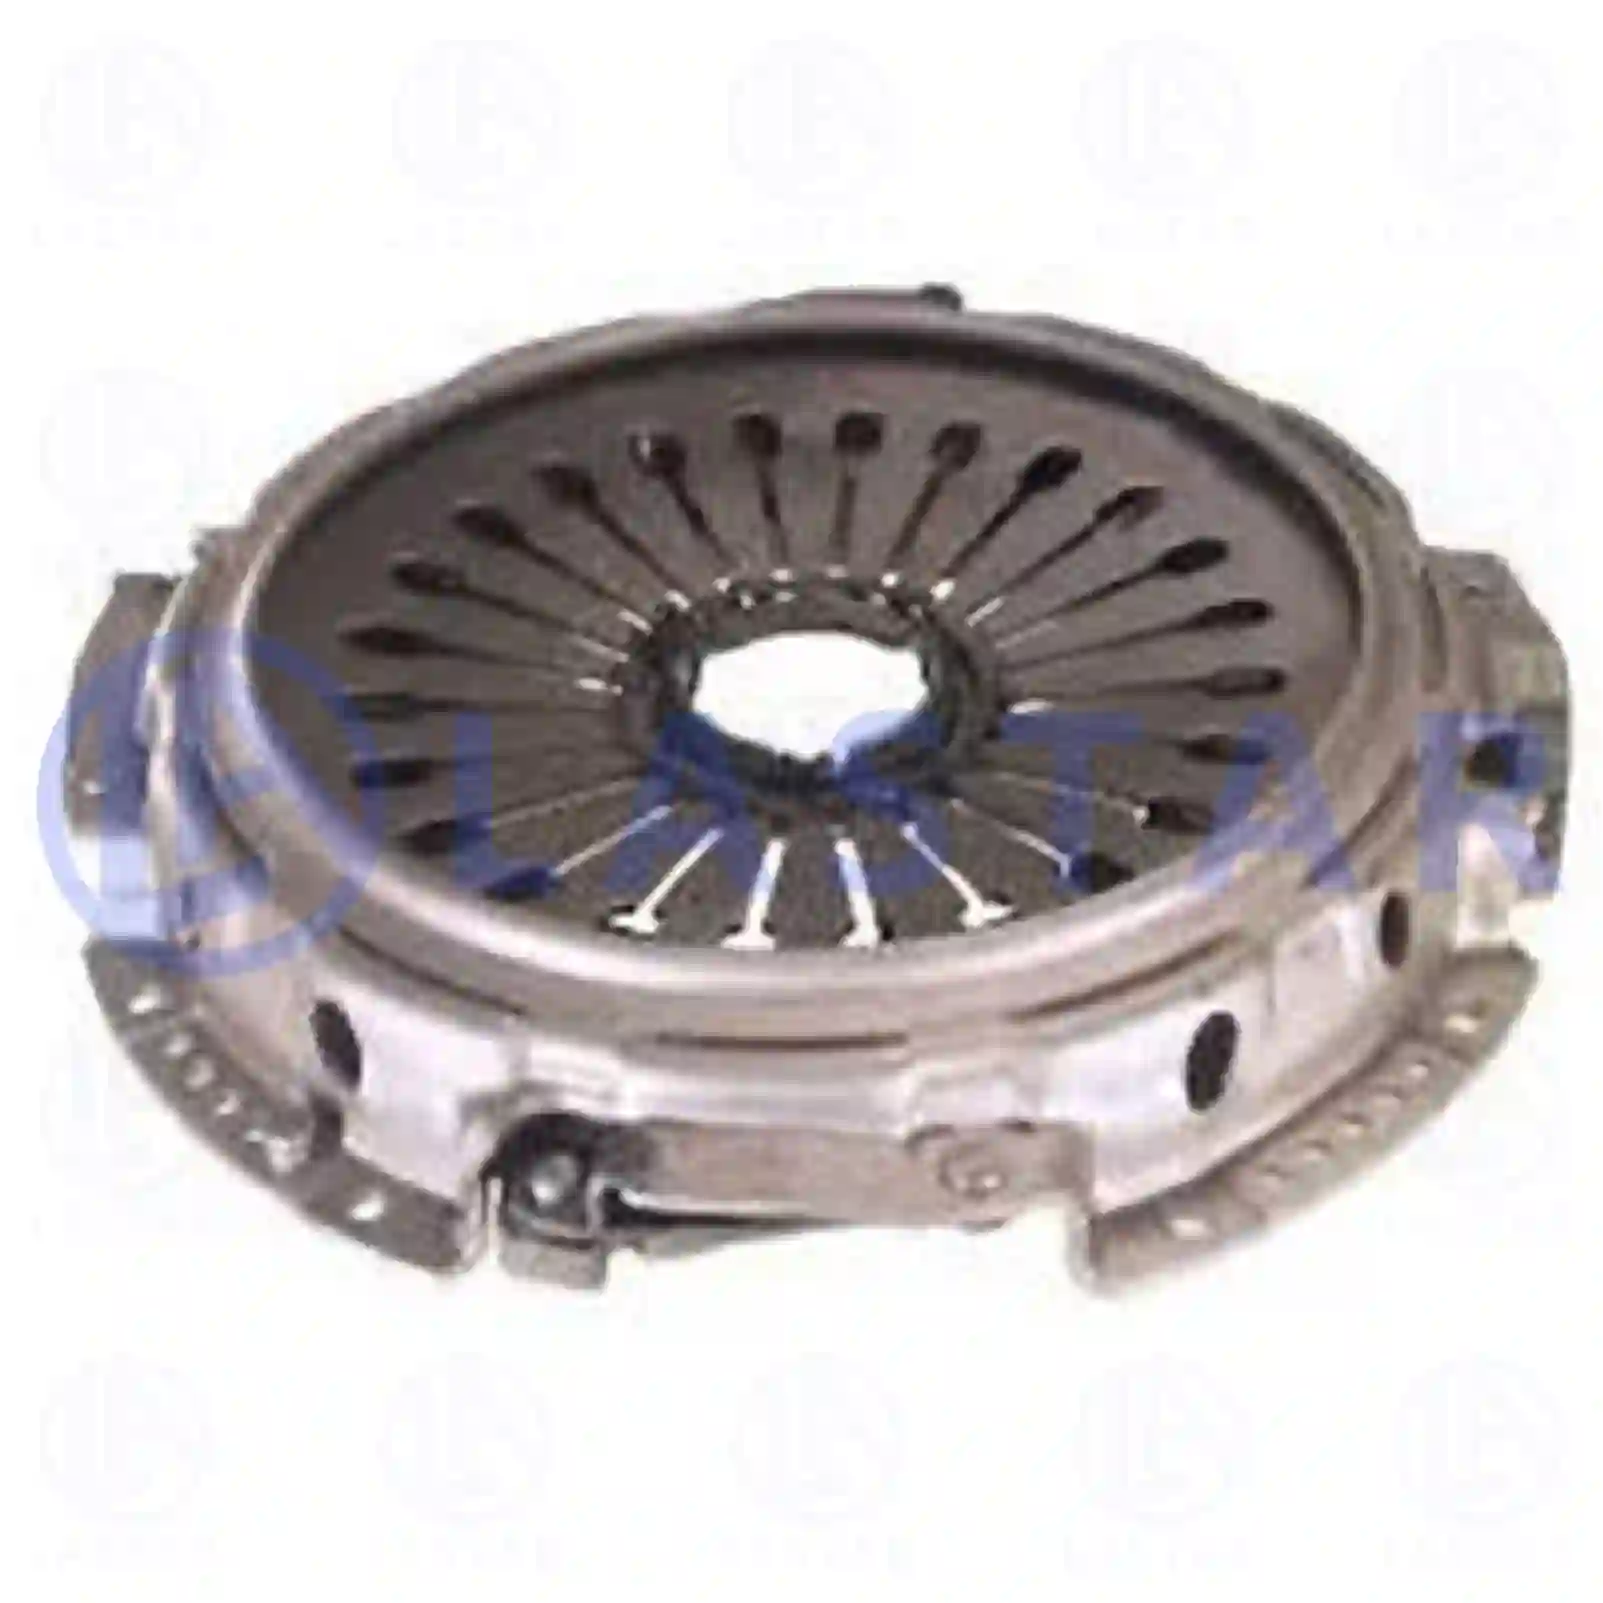 Clutch cover, 77722452, 0032509304, 003250930480, 0062501304, 006250130480 ||  77722452 Lastar Spare Part | Truck Spare Parts, Auotomotive Spare Parts Clutch cover, 77722452, 0032509304, 003250930480, 0062501304, 006250130480 ||  77722452 Lastar Spare Part | Truck Spare Parts, Auotomotive Spare Parts